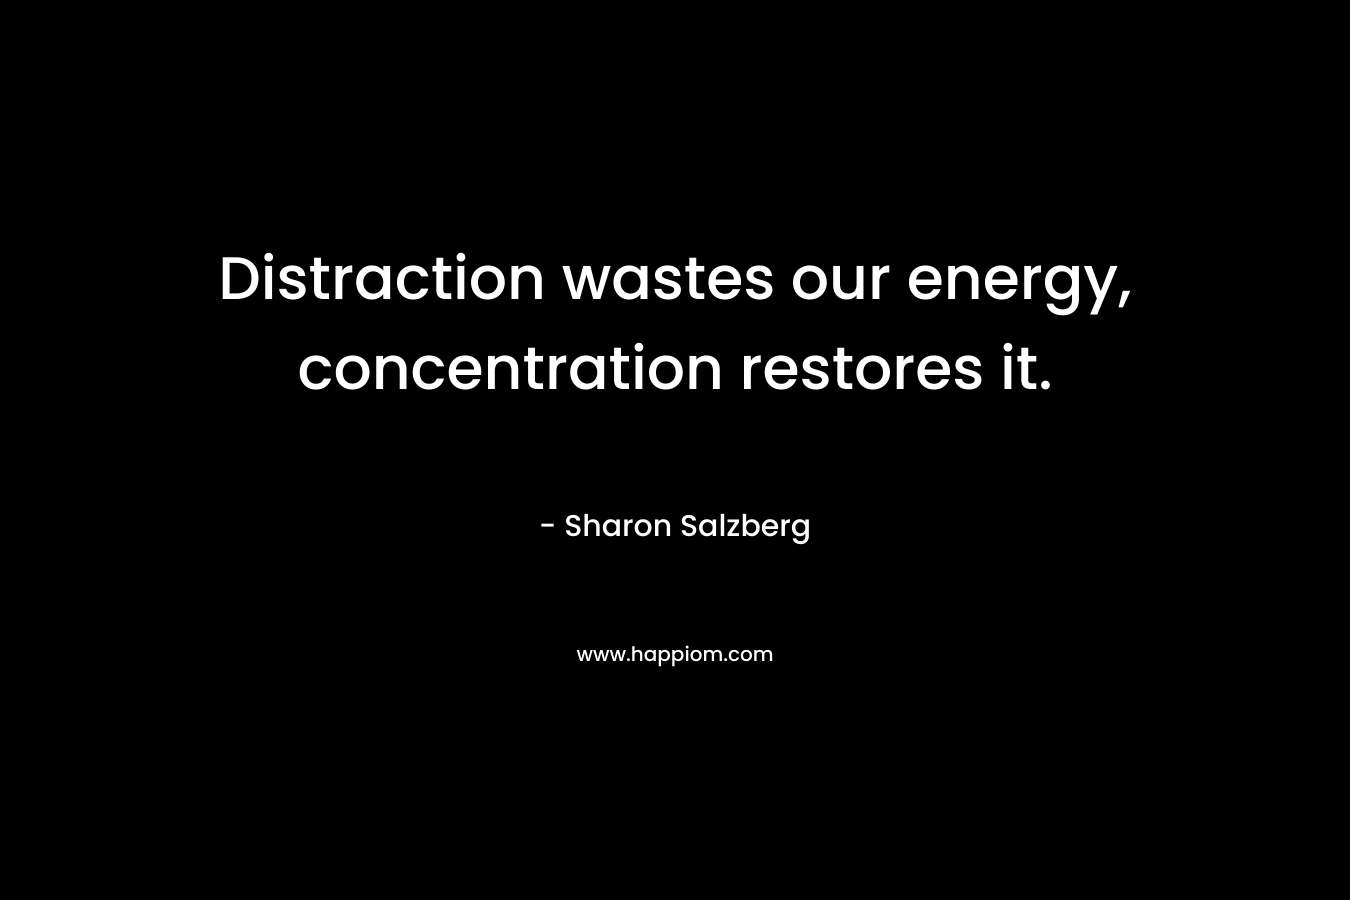 Distraction wastes our energy, concentration restores it. – Sharon Salzberg